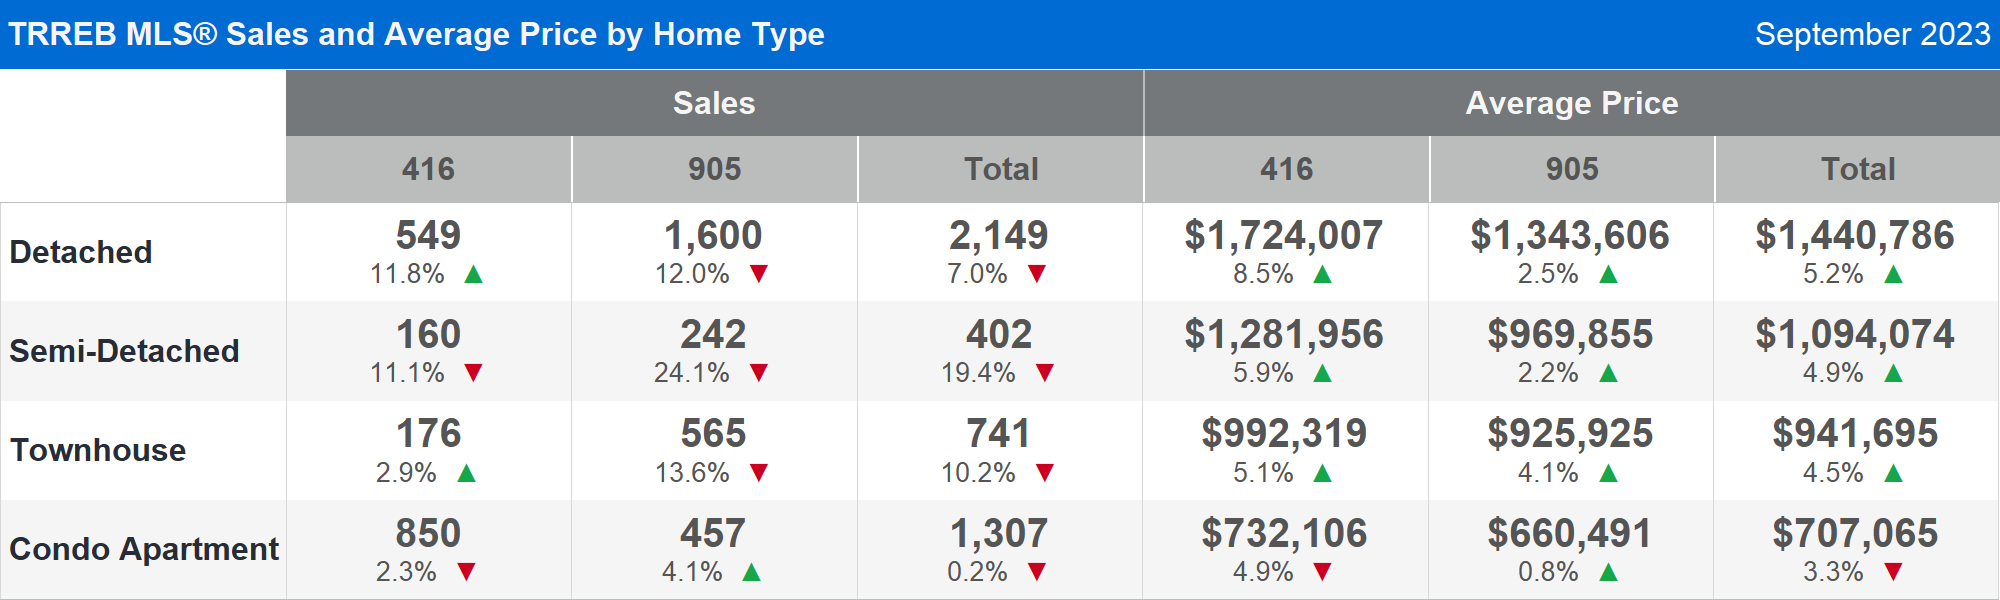 TRREB MLS® Sales and Average Price by Home Type Caption: September 2023